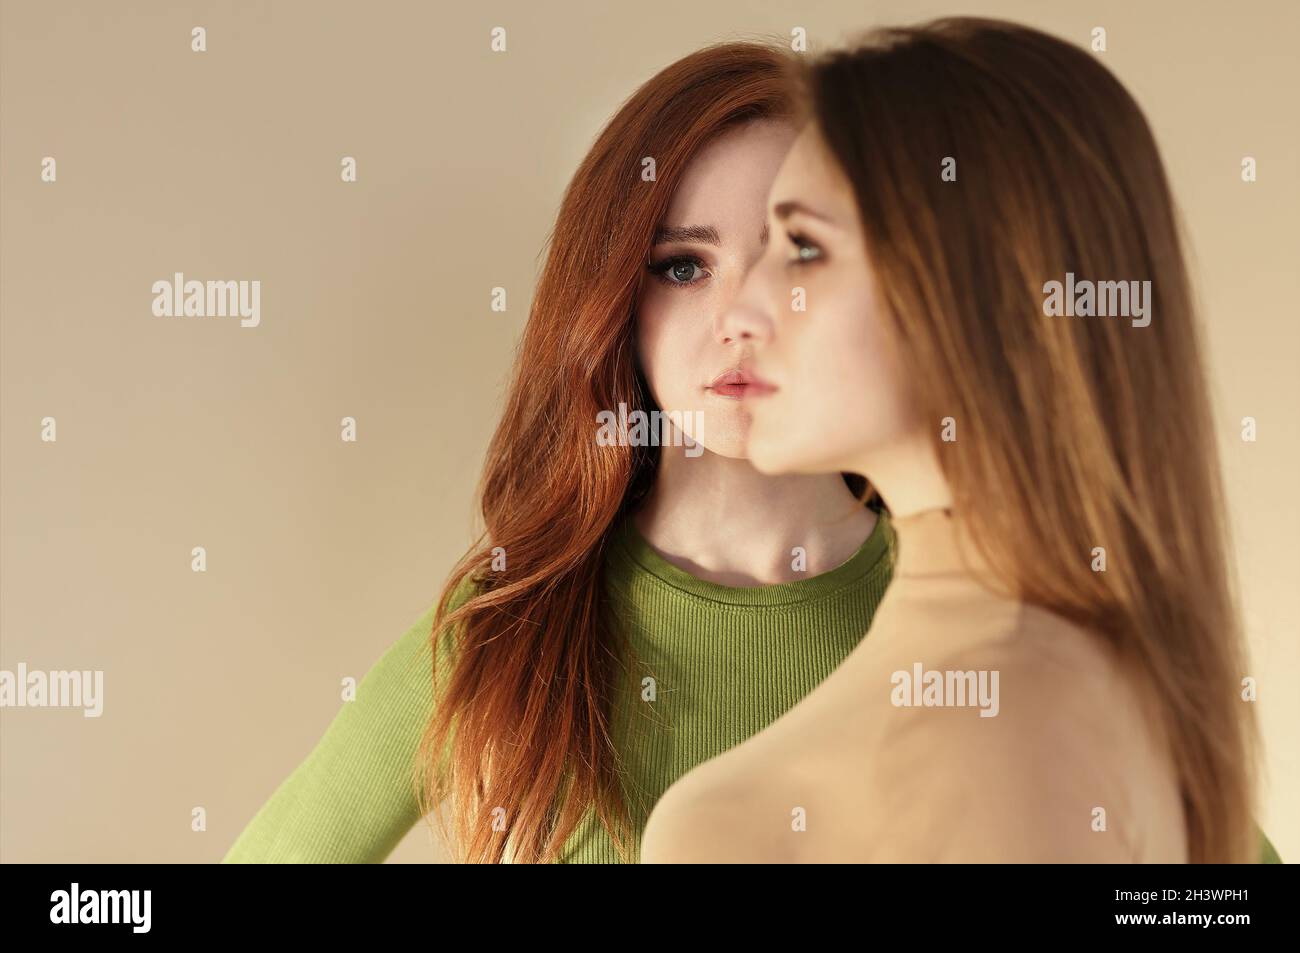 Two cheerful young women Stock Photo